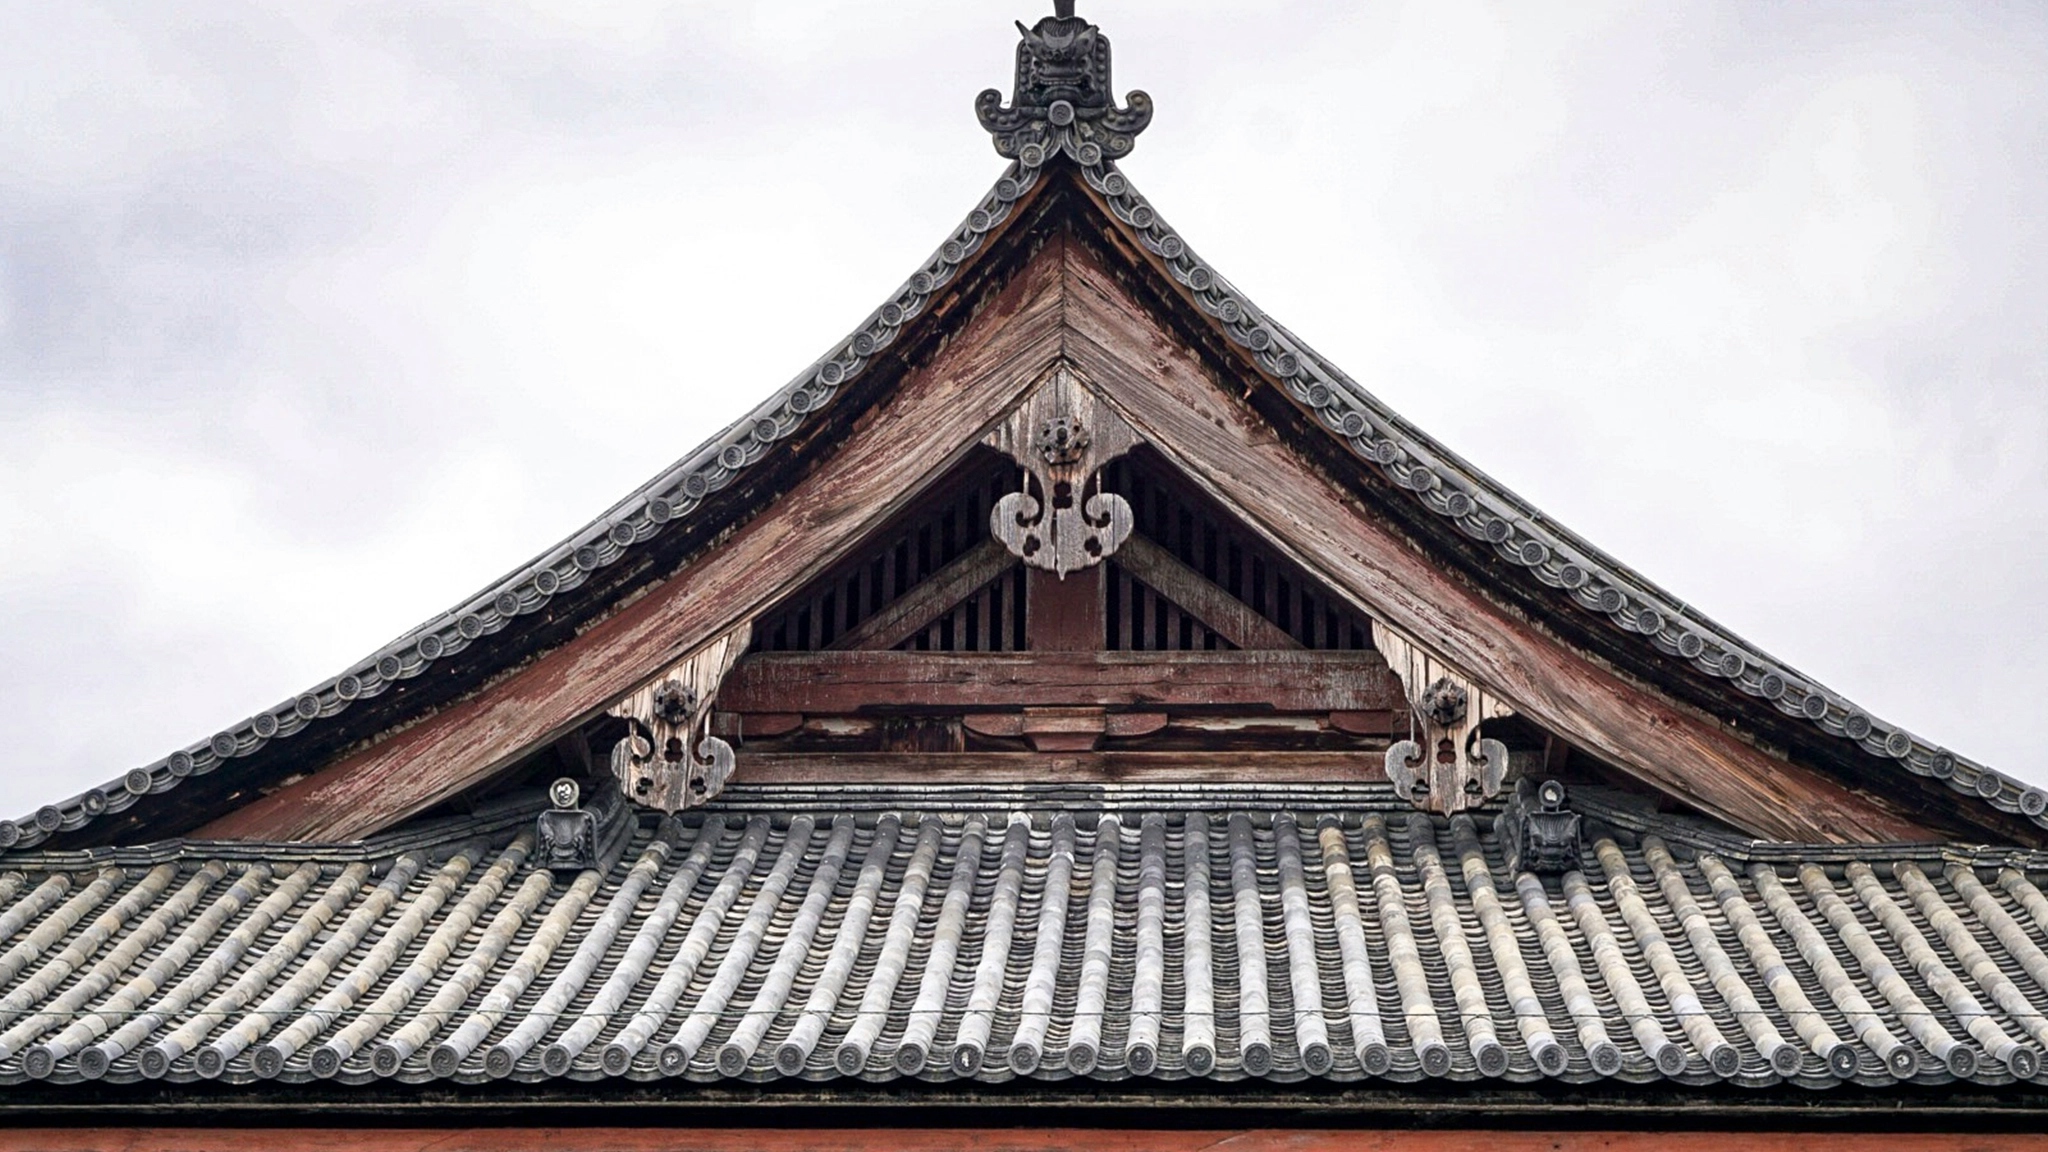 Roof tiling and carved woodworking details at Toji Temple, Kyoto